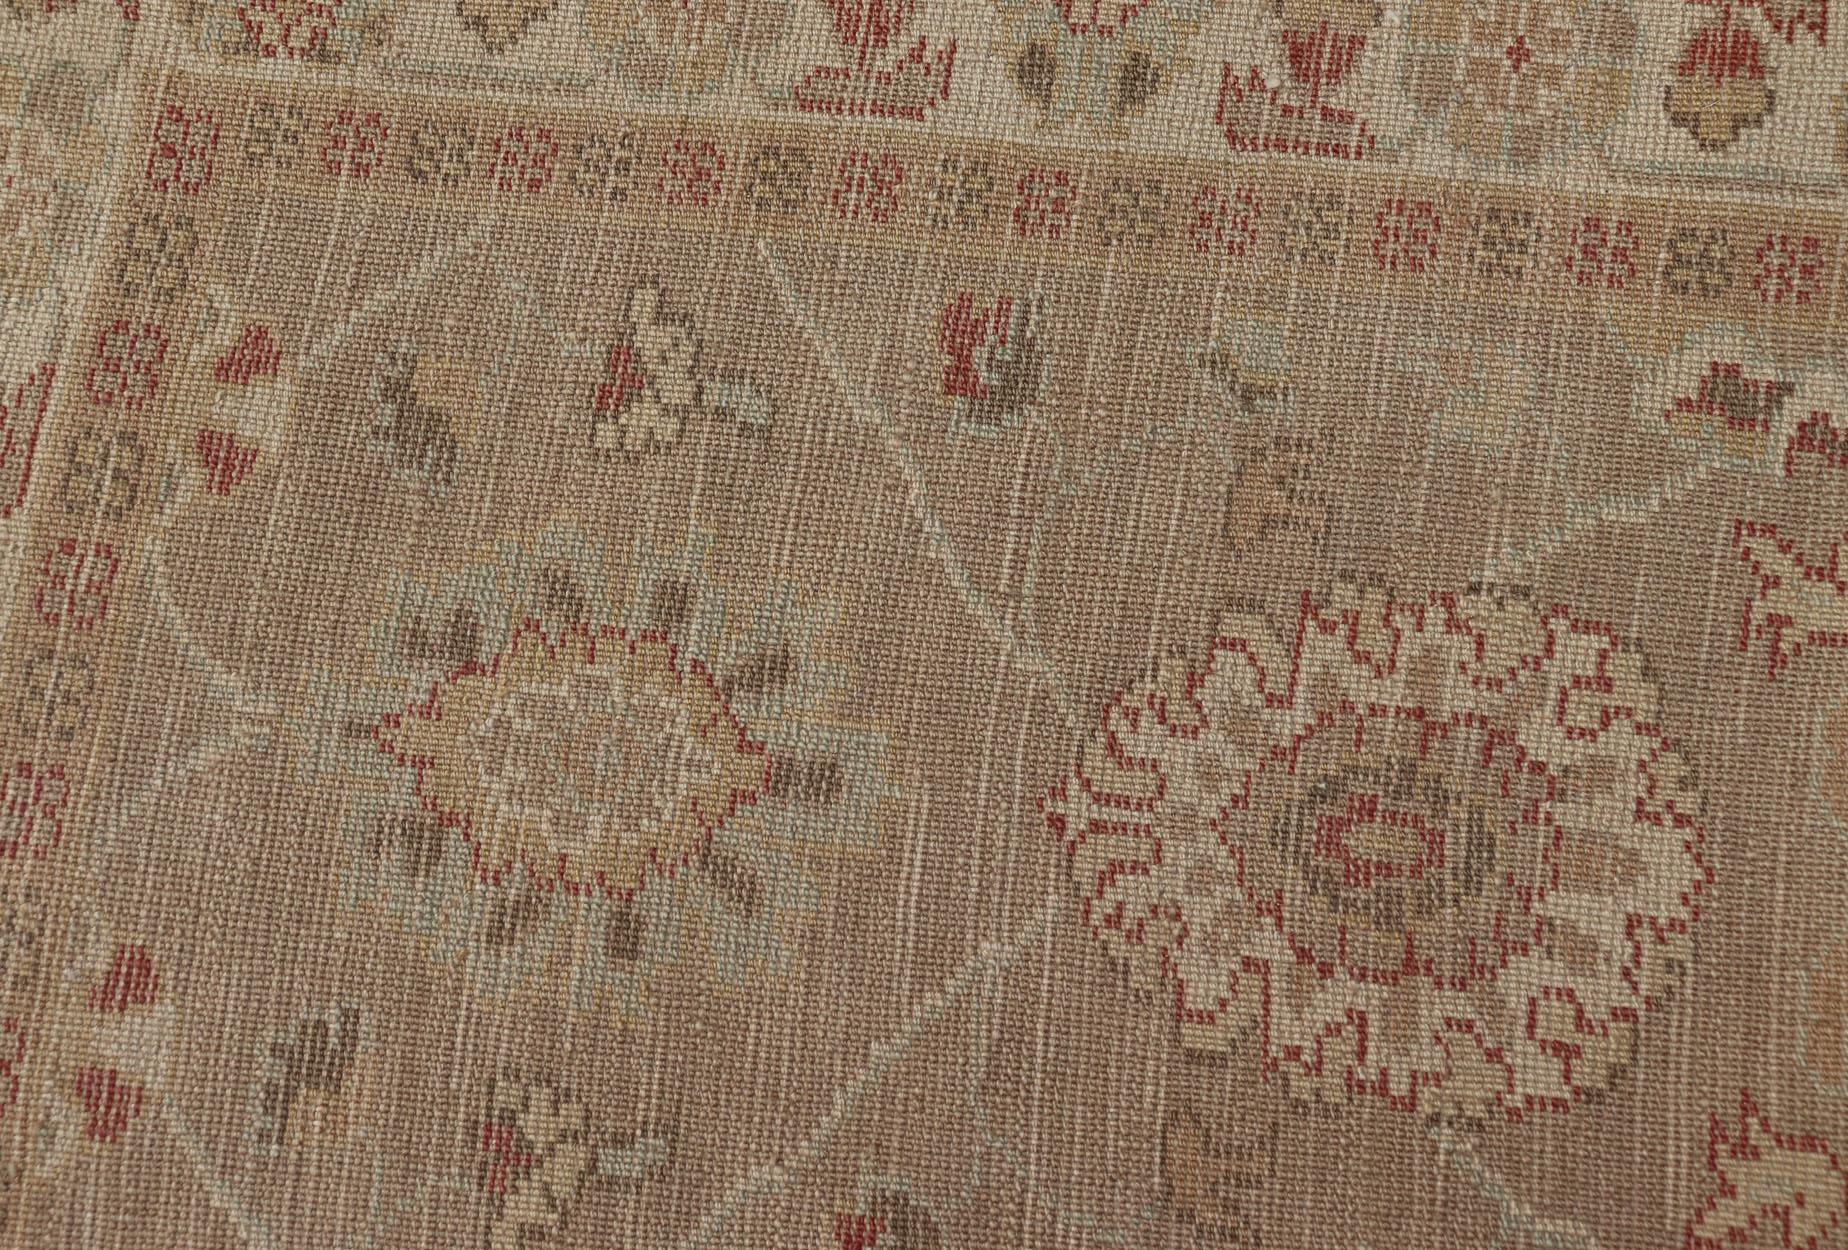 Wool Long Turkish Oushak Runner with All-Over Design in Light Brown, Tan & Red For Sale